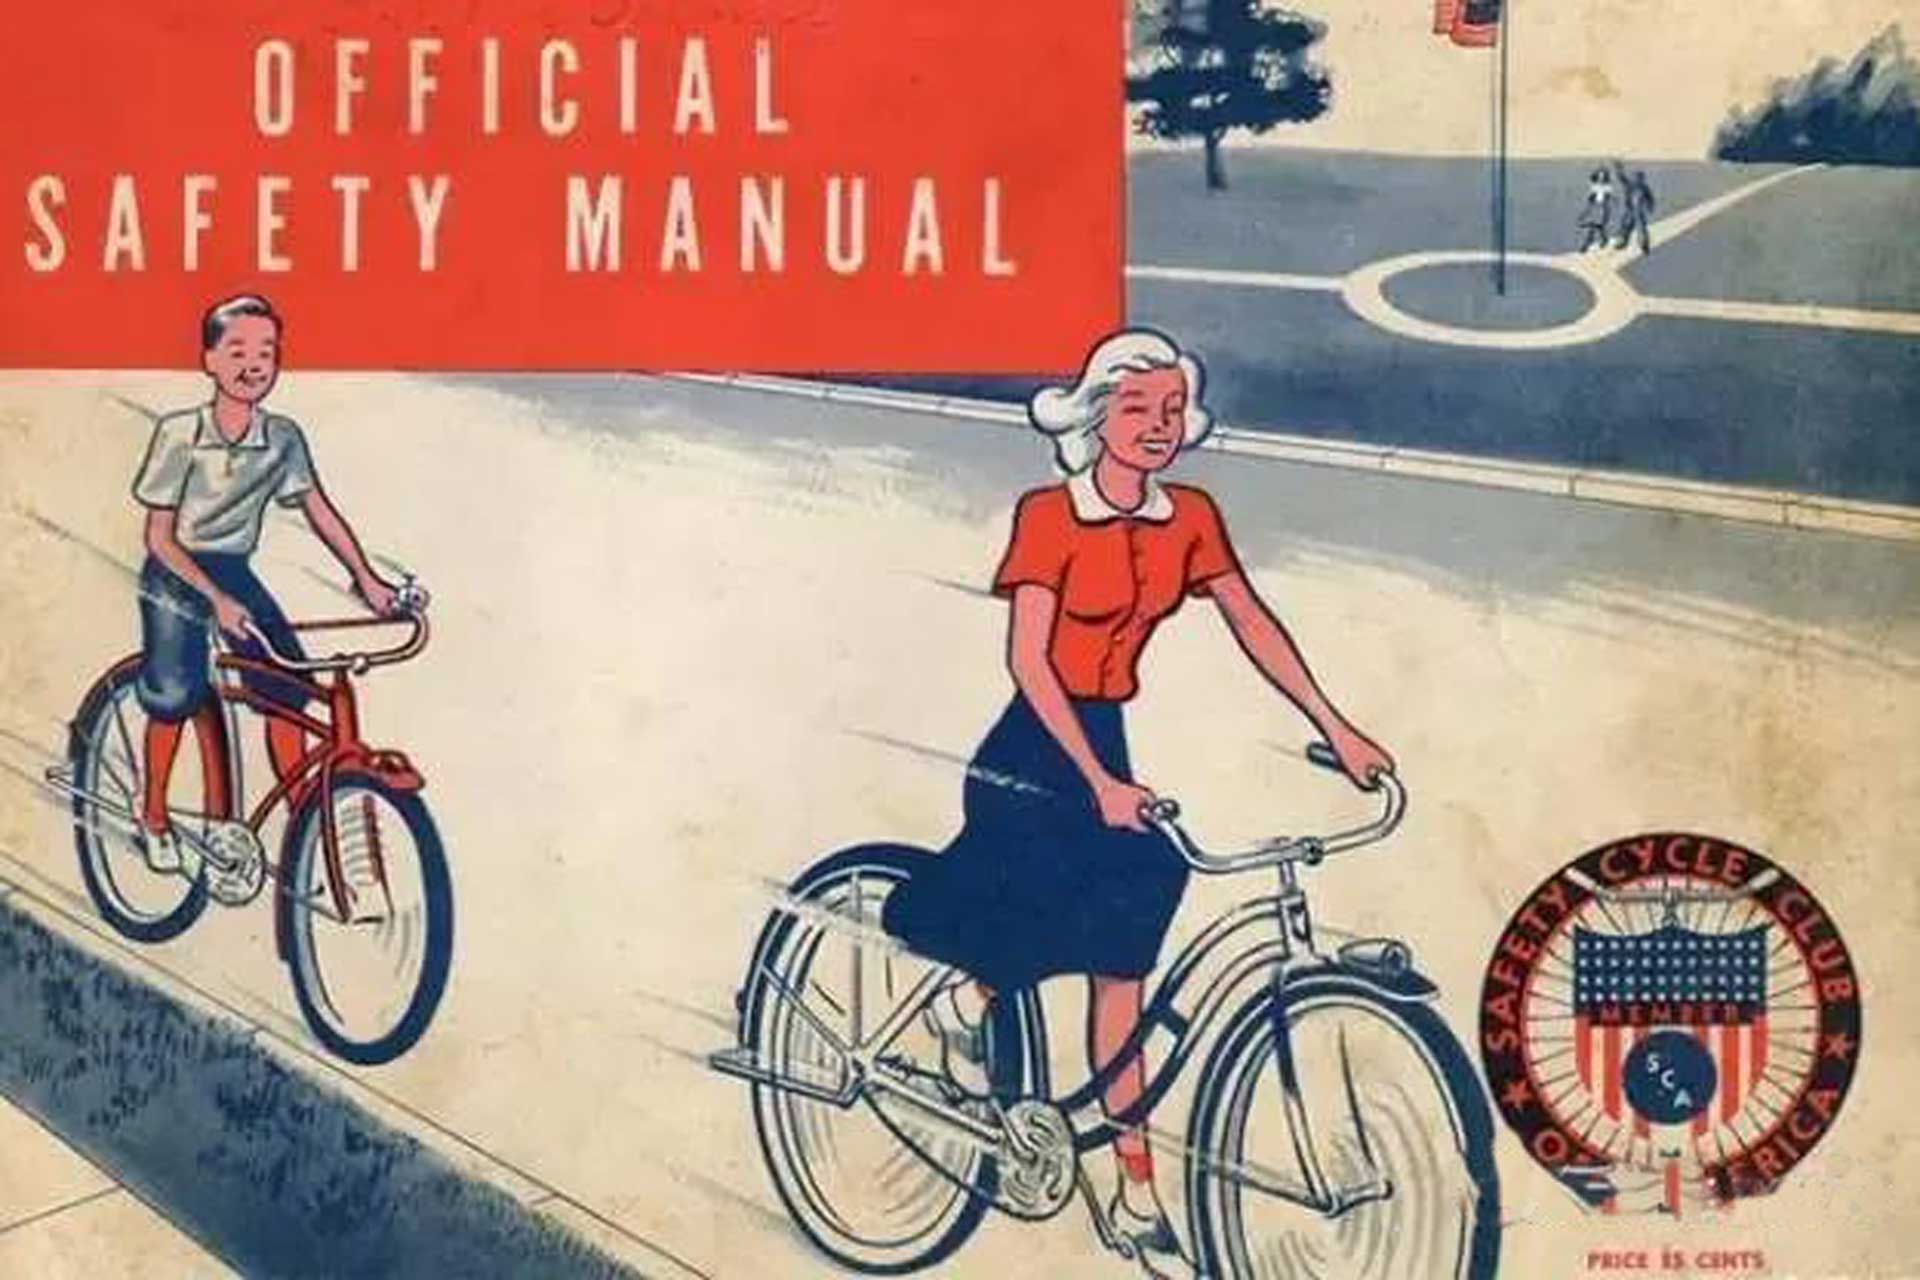 Why are the 19 bicycle riding rules of 1942 still adhering to?